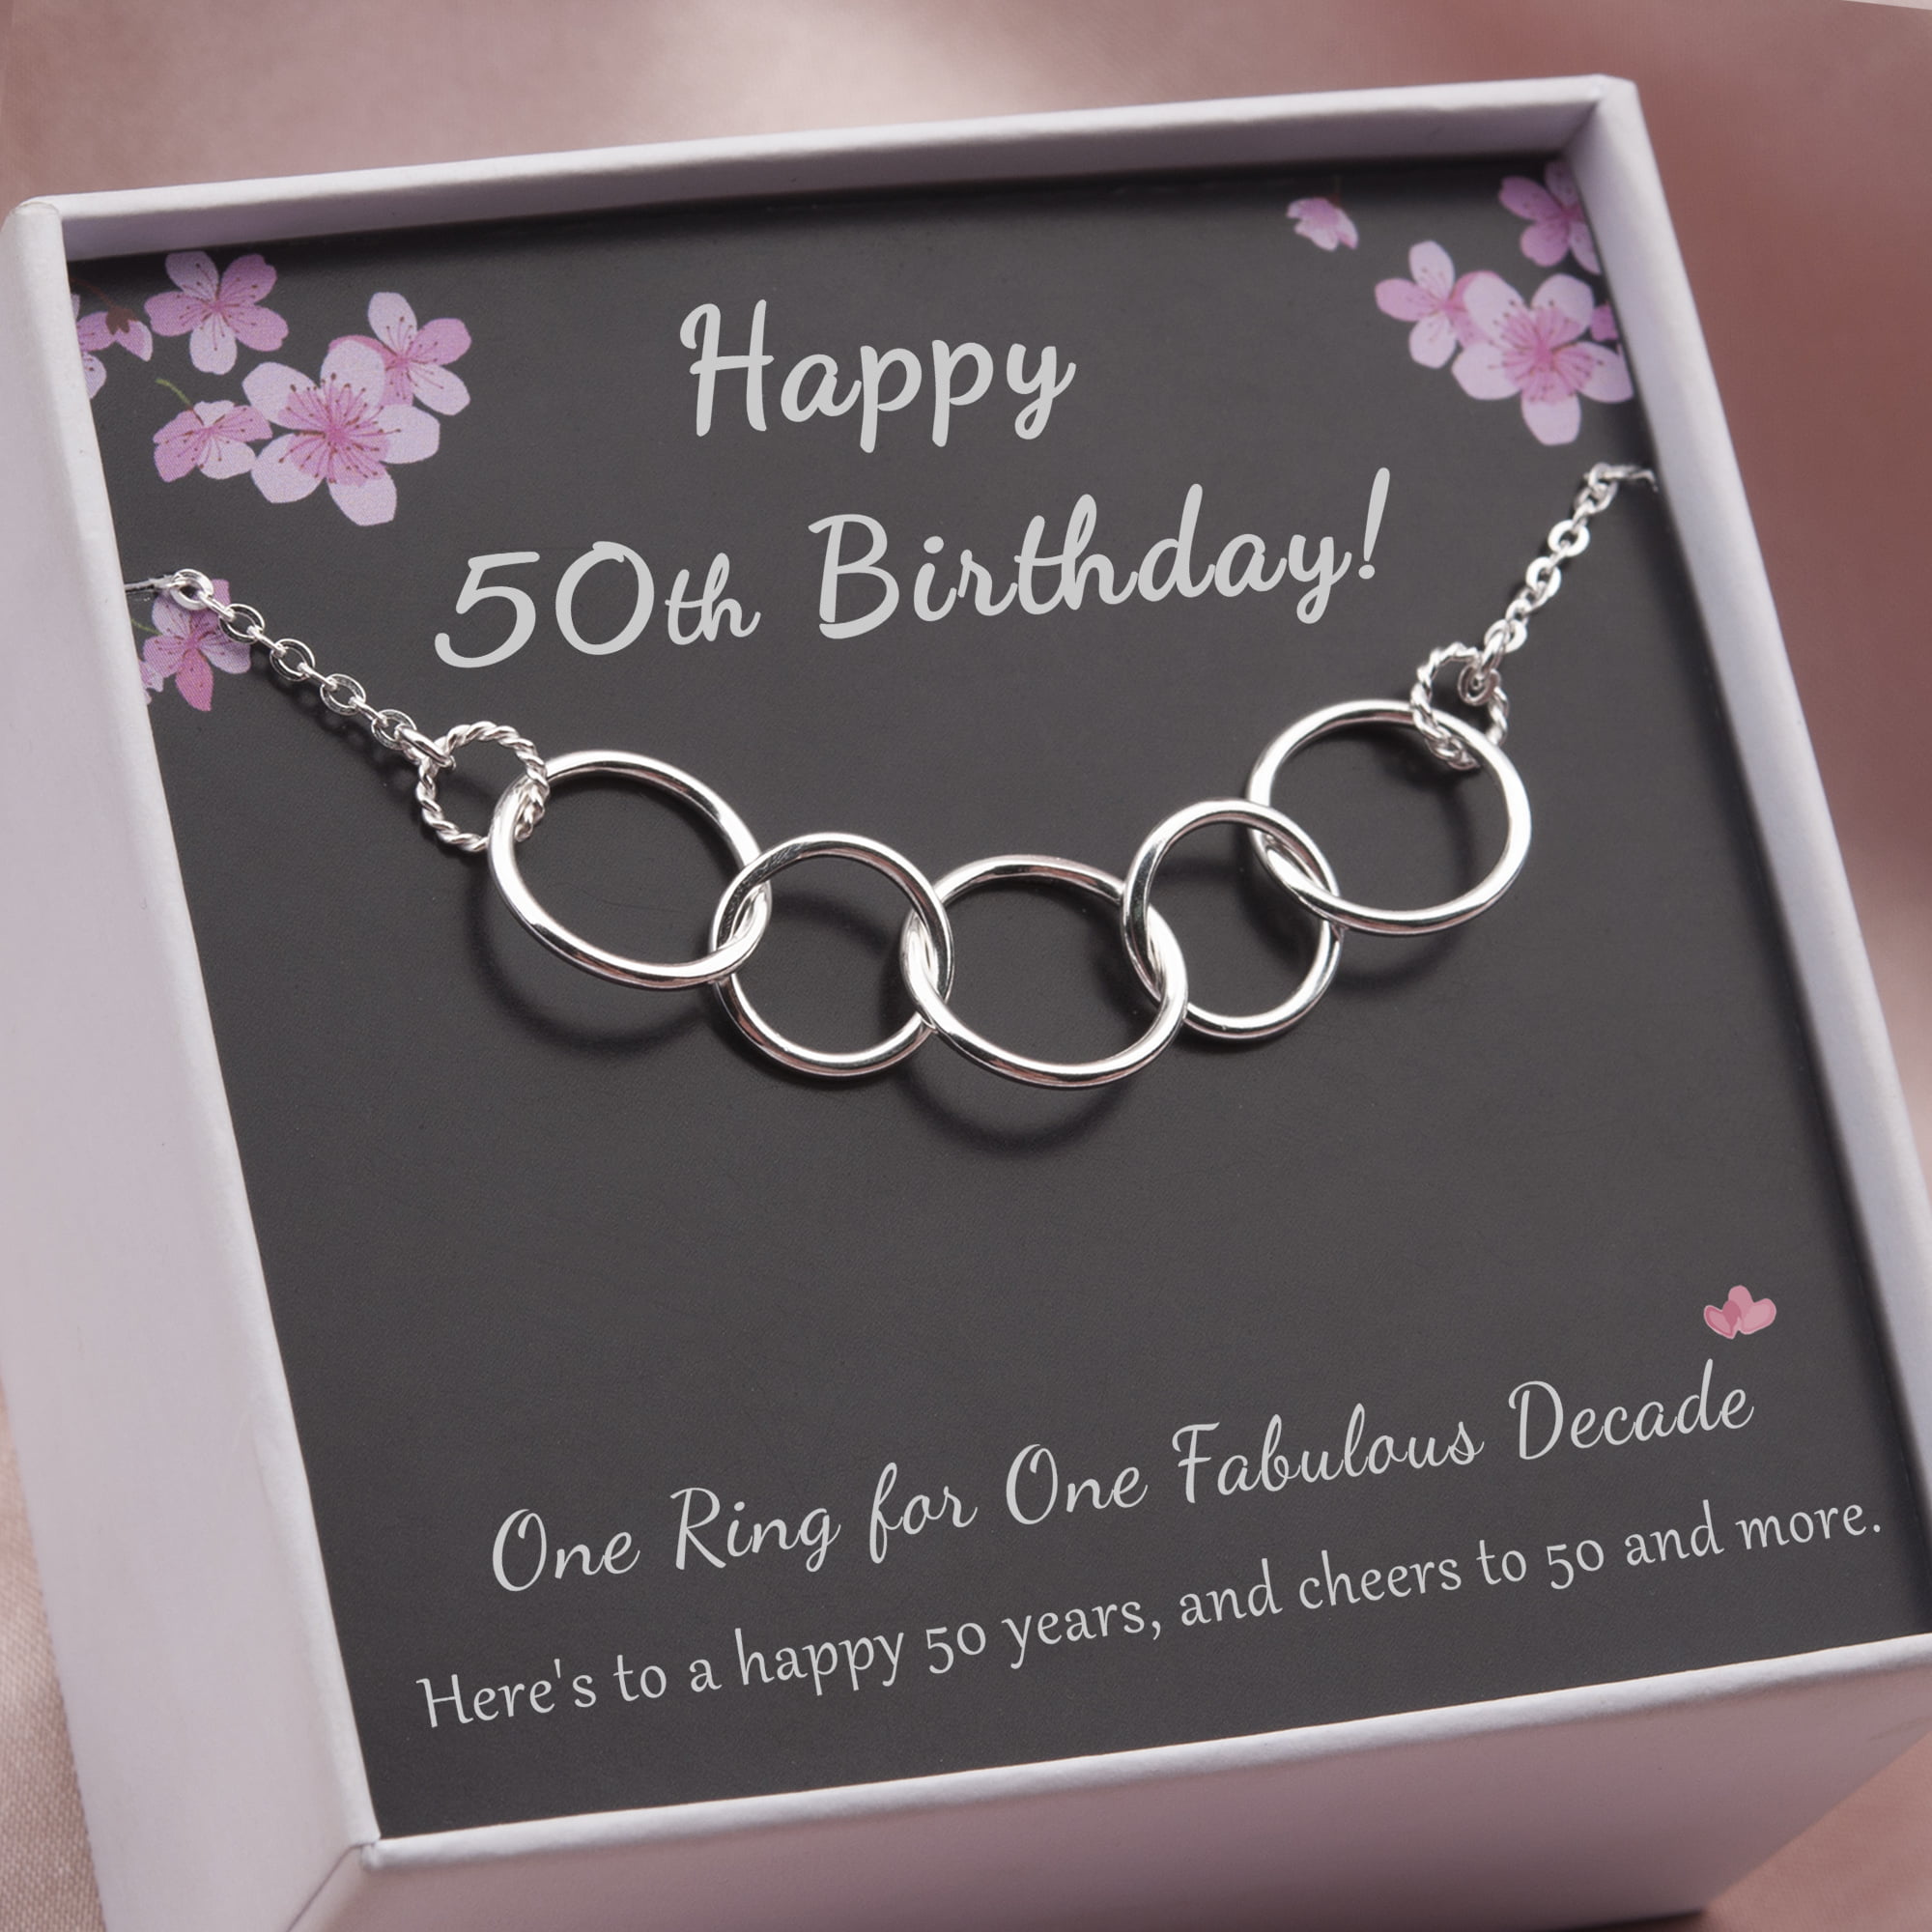 50th Birthday Gifts for Women,925 Sterling Silver Necklace,50th Birthday Necklace,5 Interlocking Infinity Circles Necklace